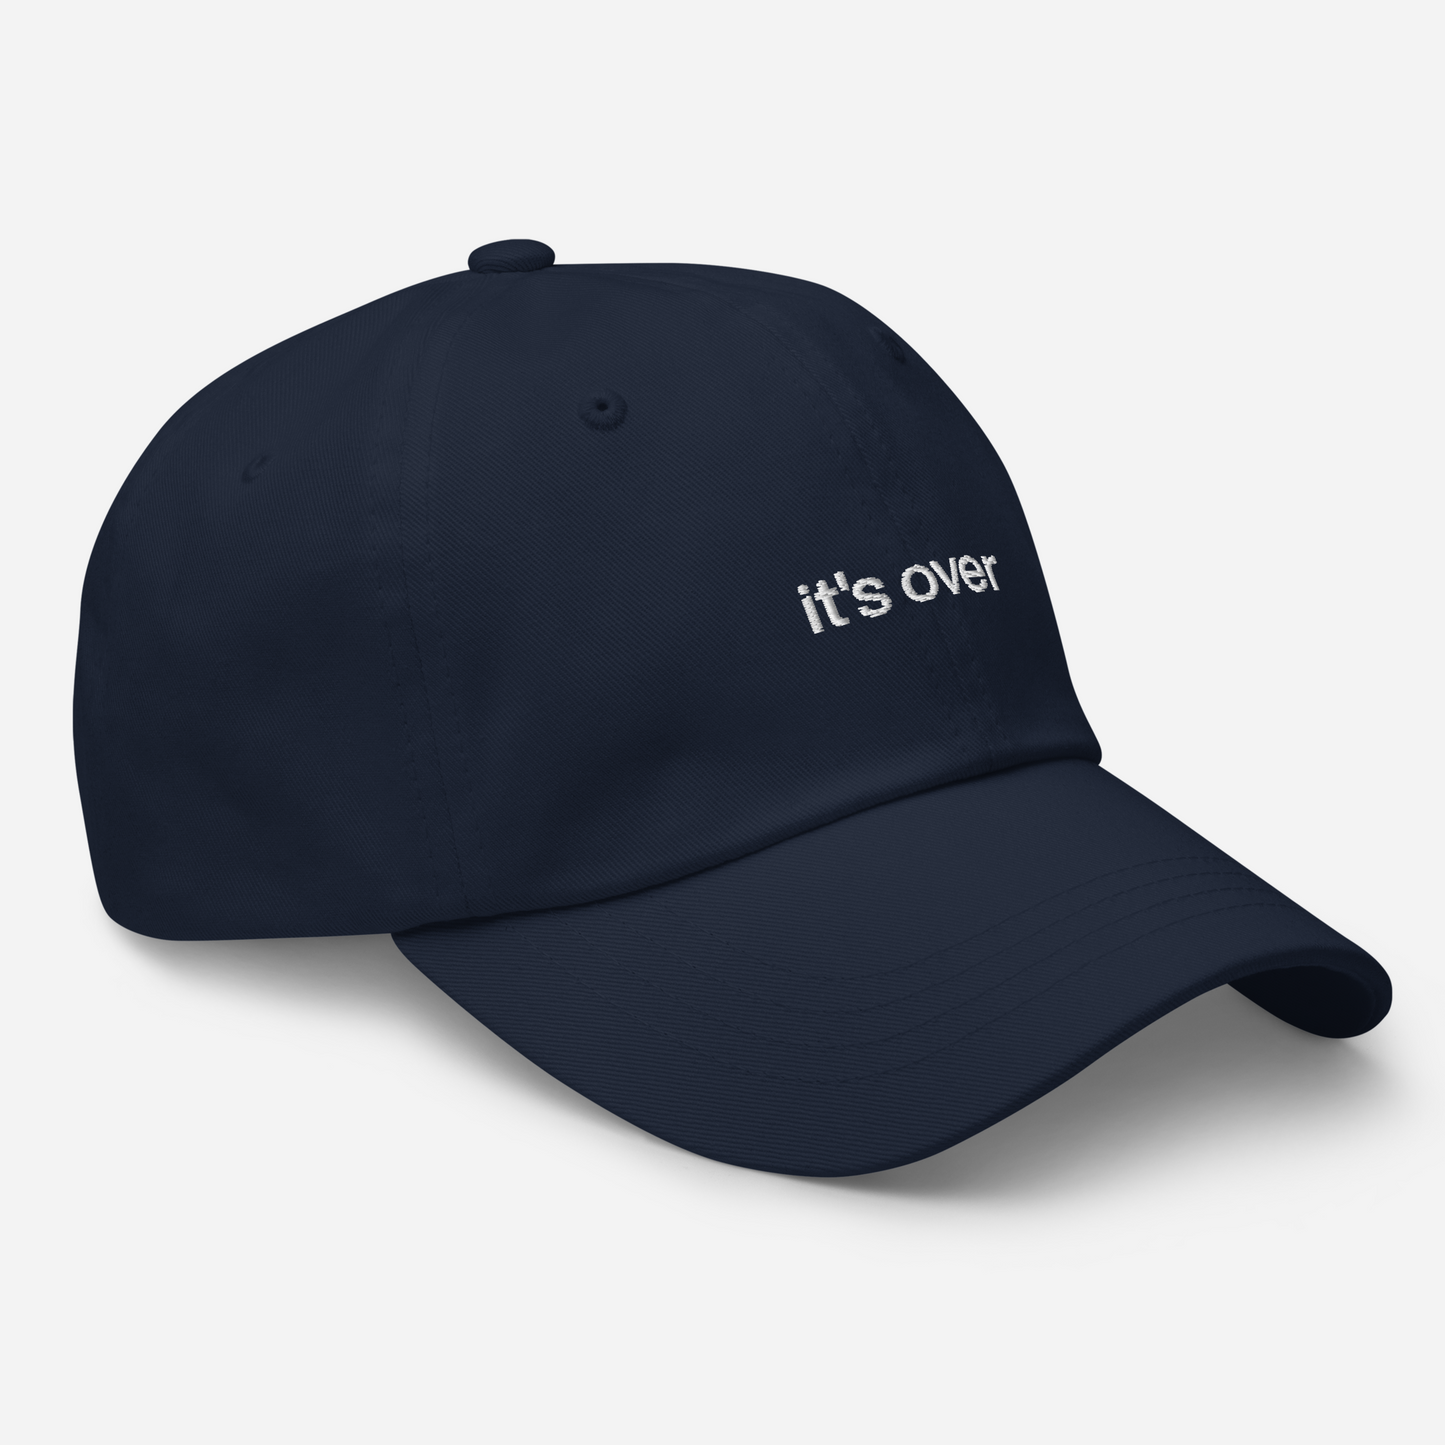 it's over hat